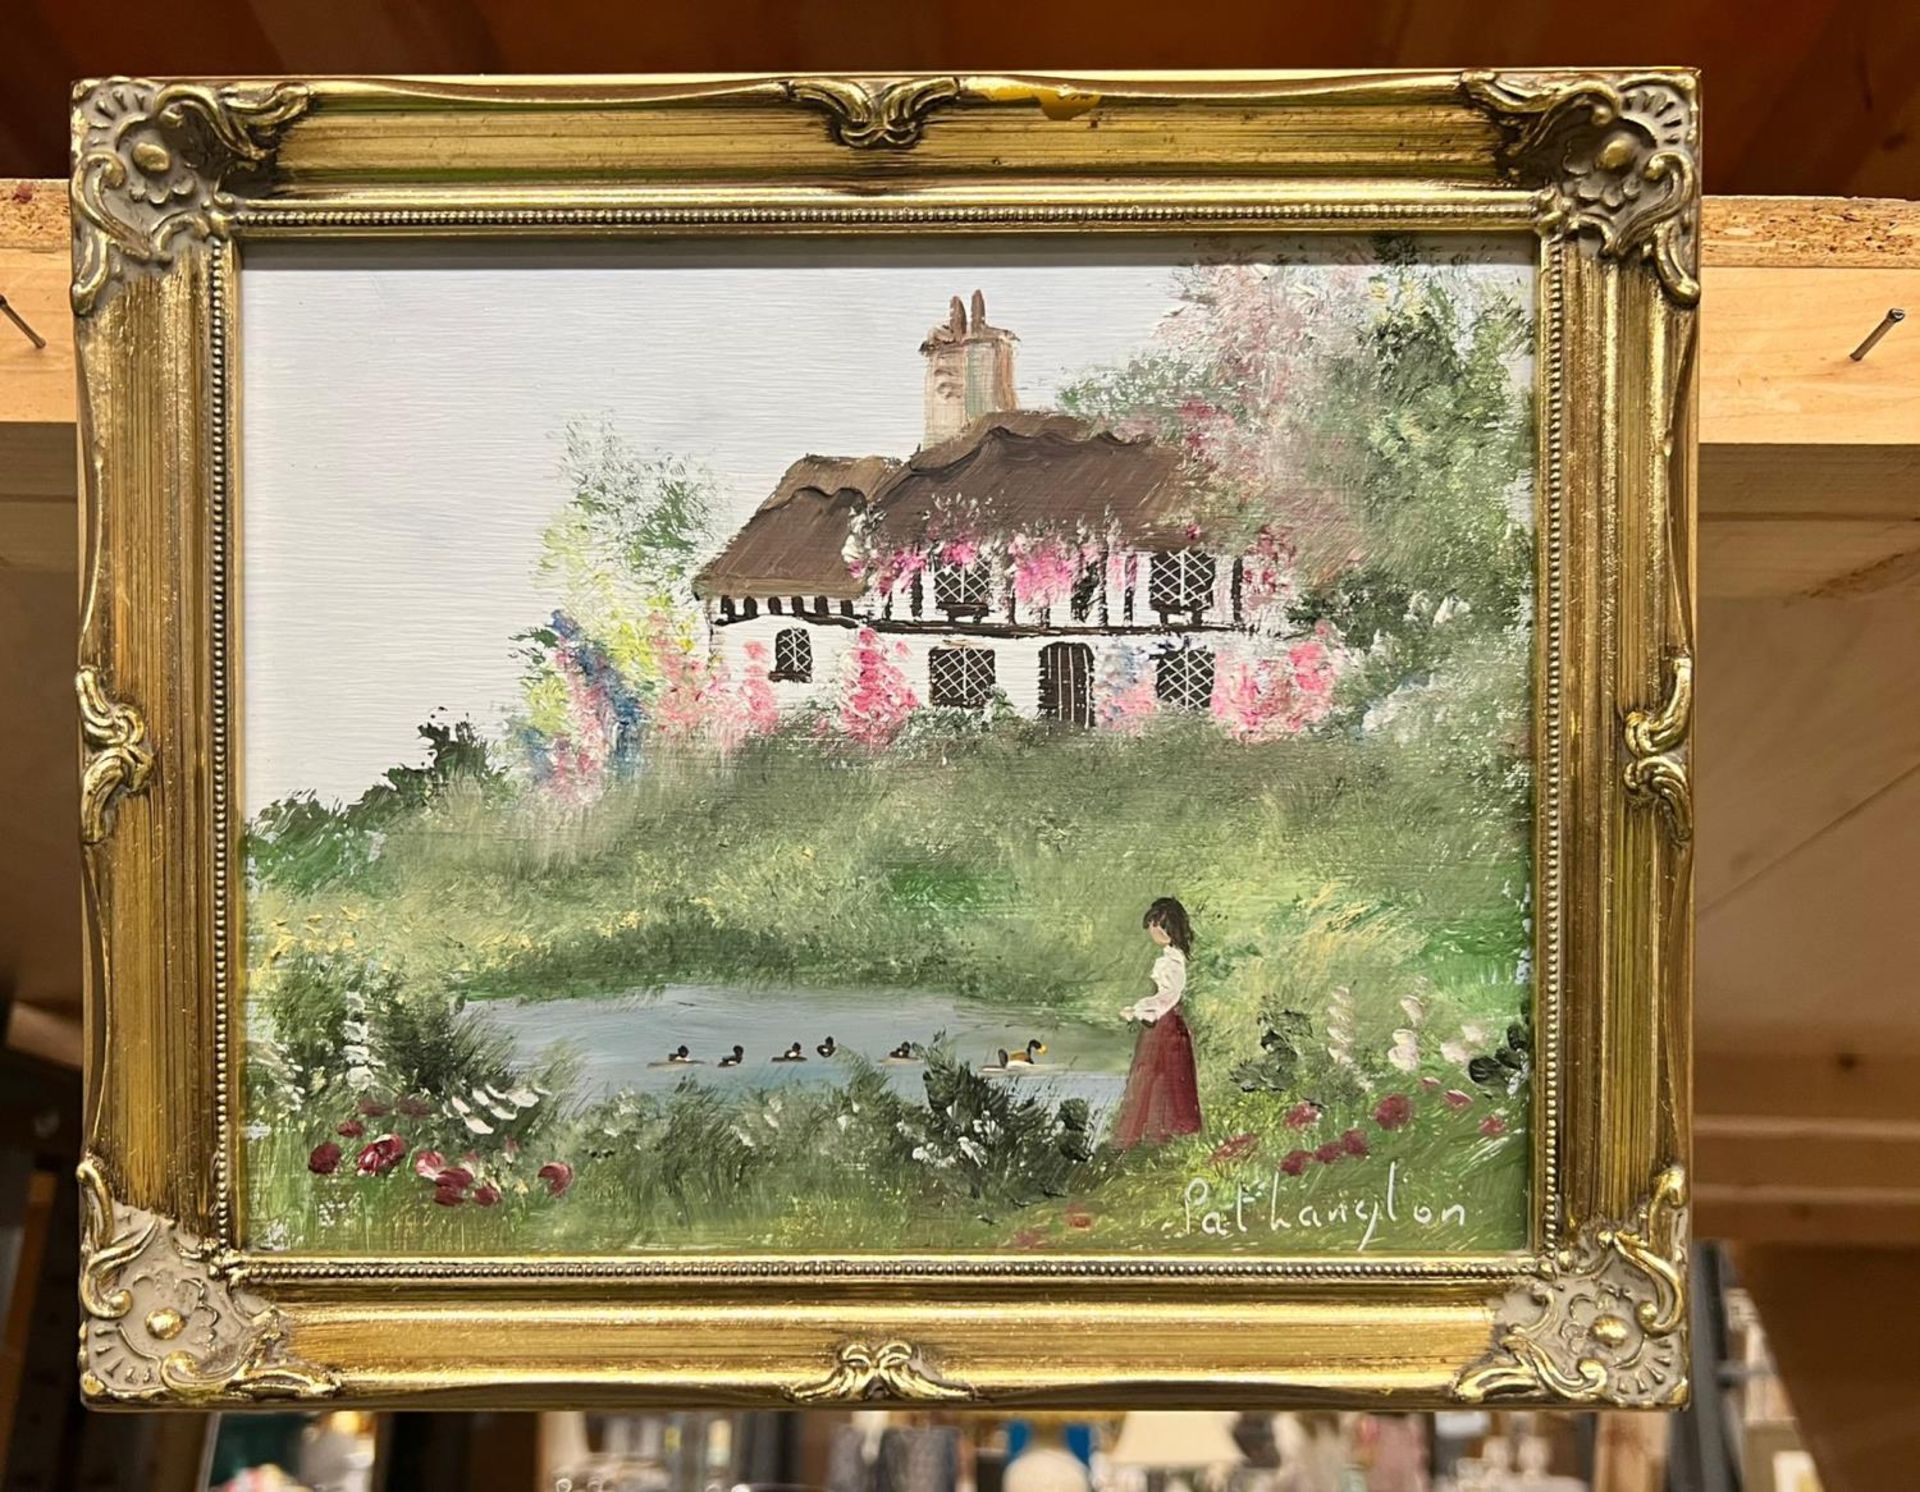 TWO PAT LANGTON SIGNED OILS ON BOARD OF COTTAGE SCENES, ONE WITH A BRIDE AND BRIDESMAID, THE OTHER A - Image 2 of 3